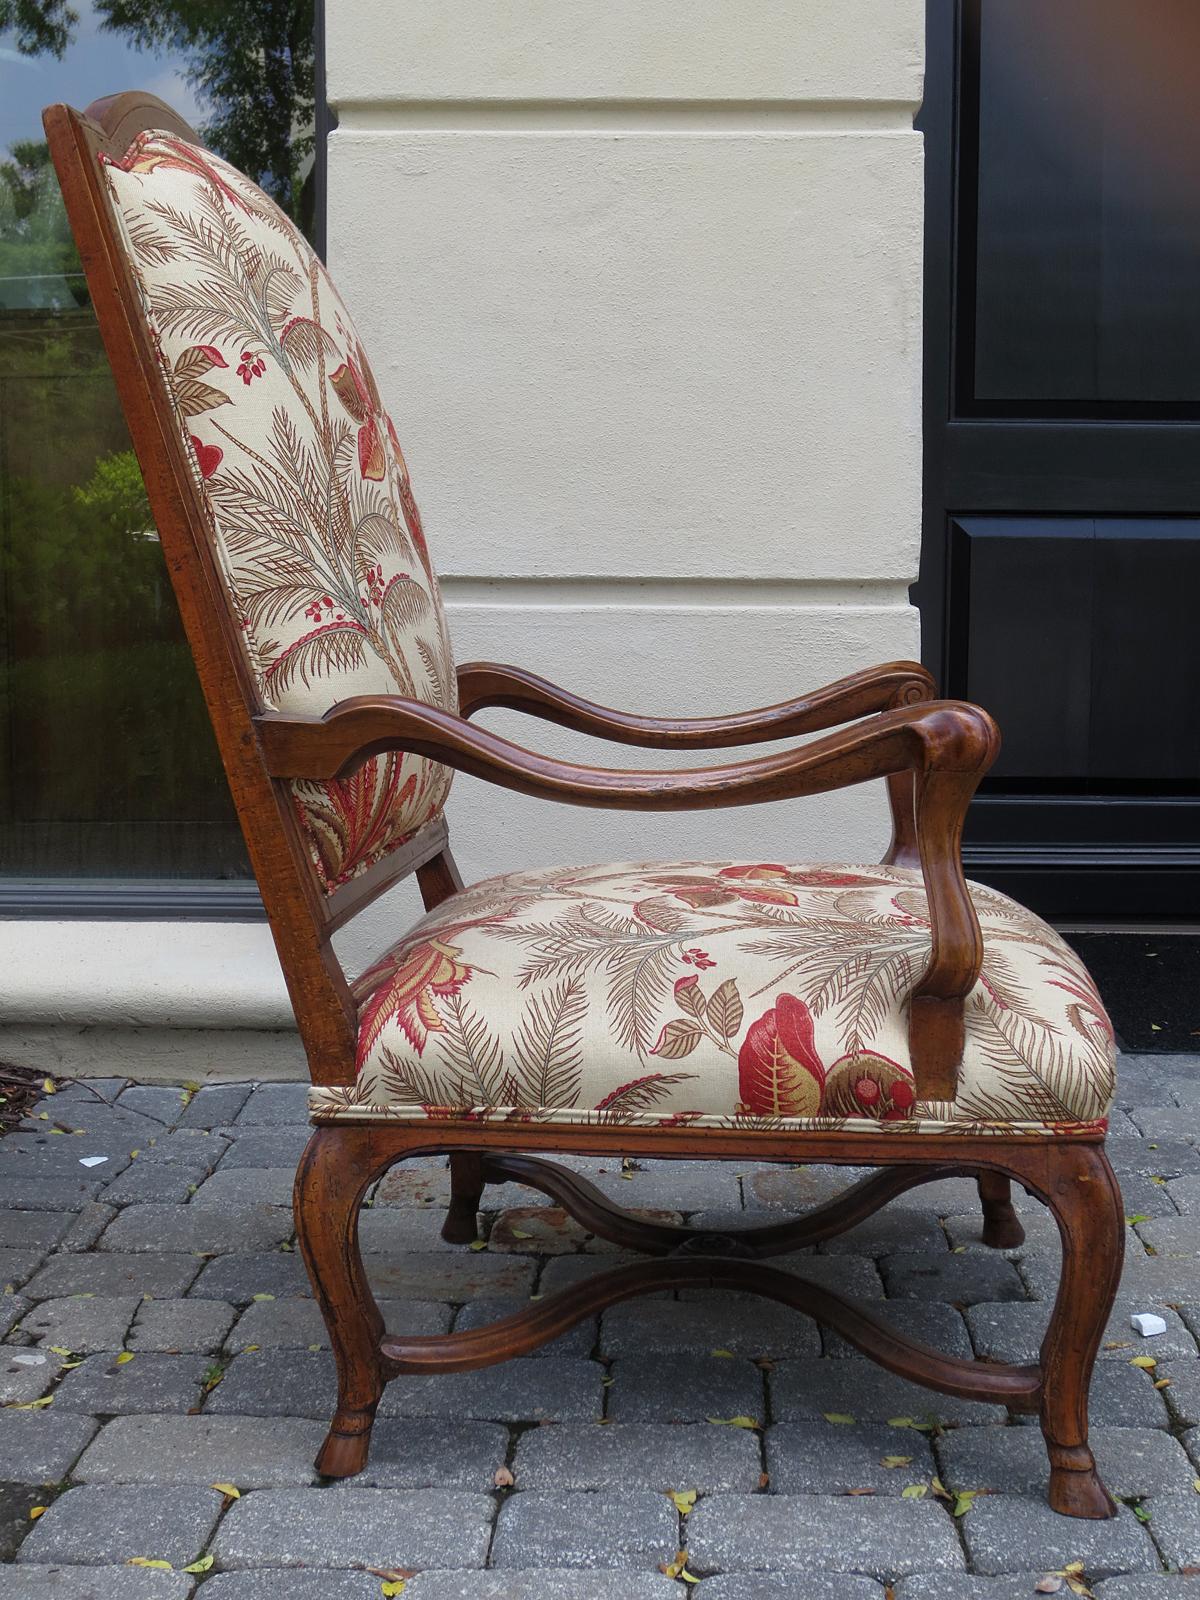 18th-19th century French Provincial walnut Regence armchair with stretcher
Measures: 26.75